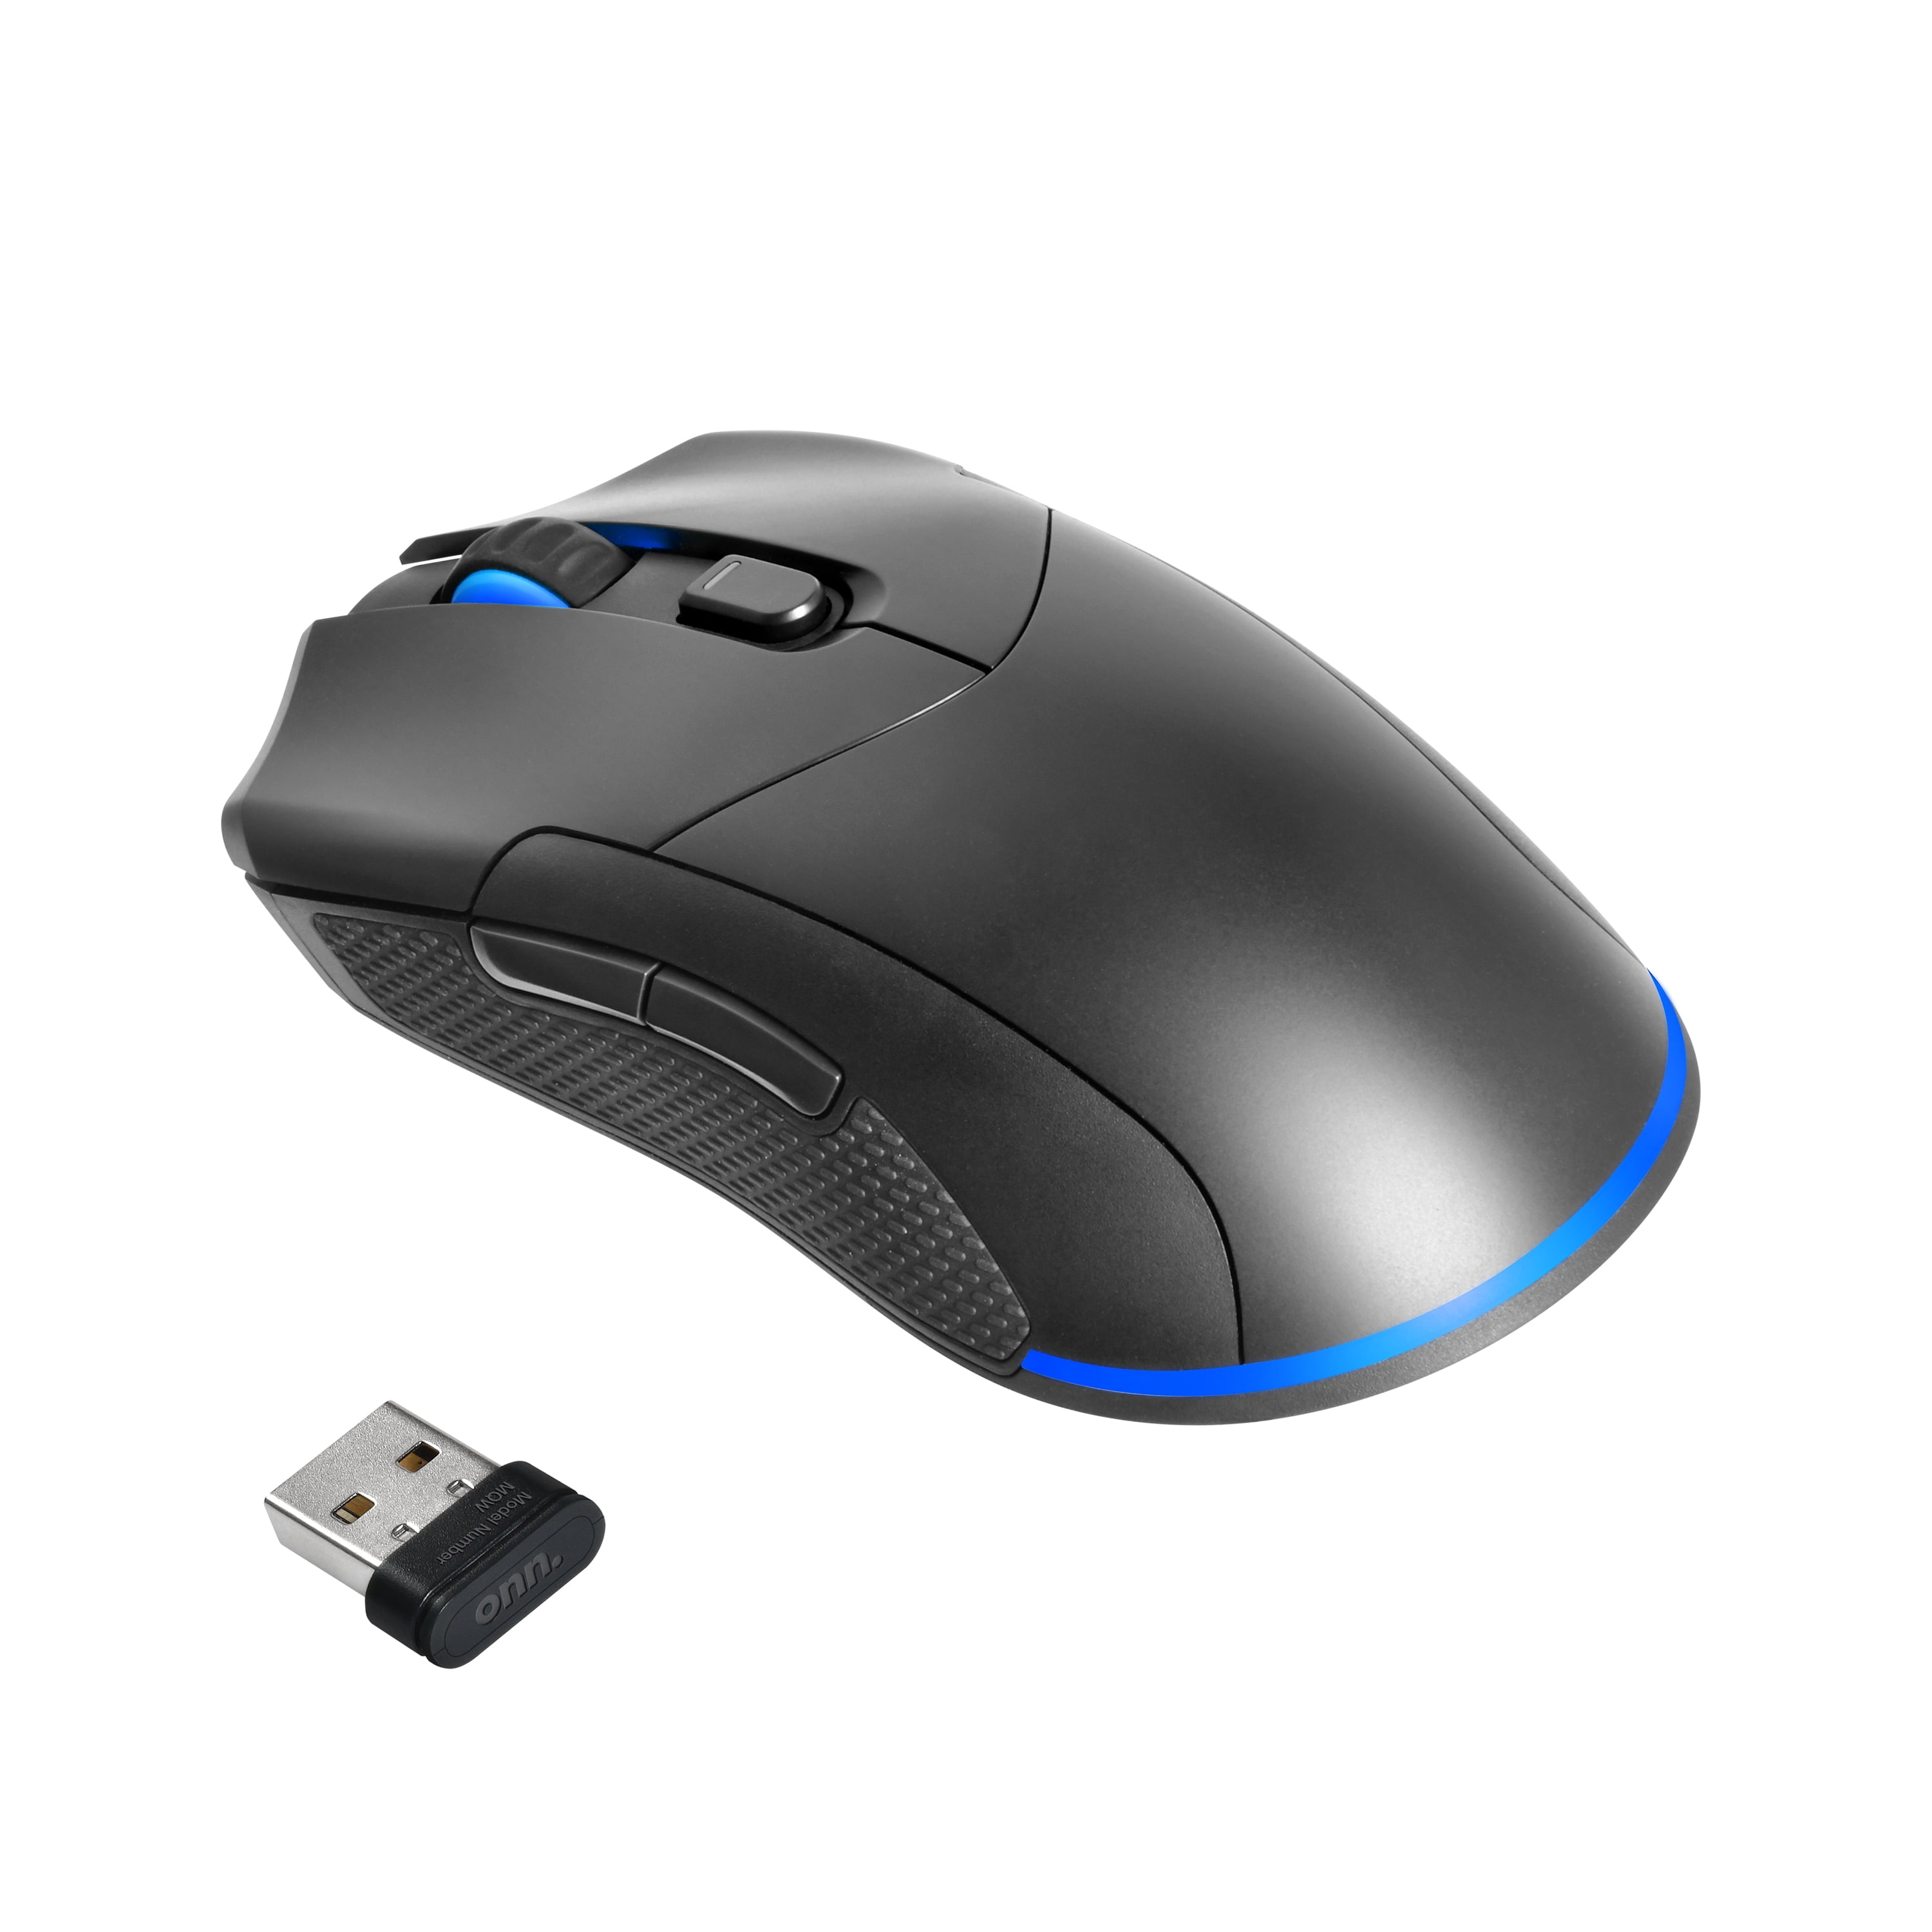 onn. Rechargable Wireless Gaming Mouse with LED Lighting and 8 Programmable Buttons, Adjustable 200-7200 DPI